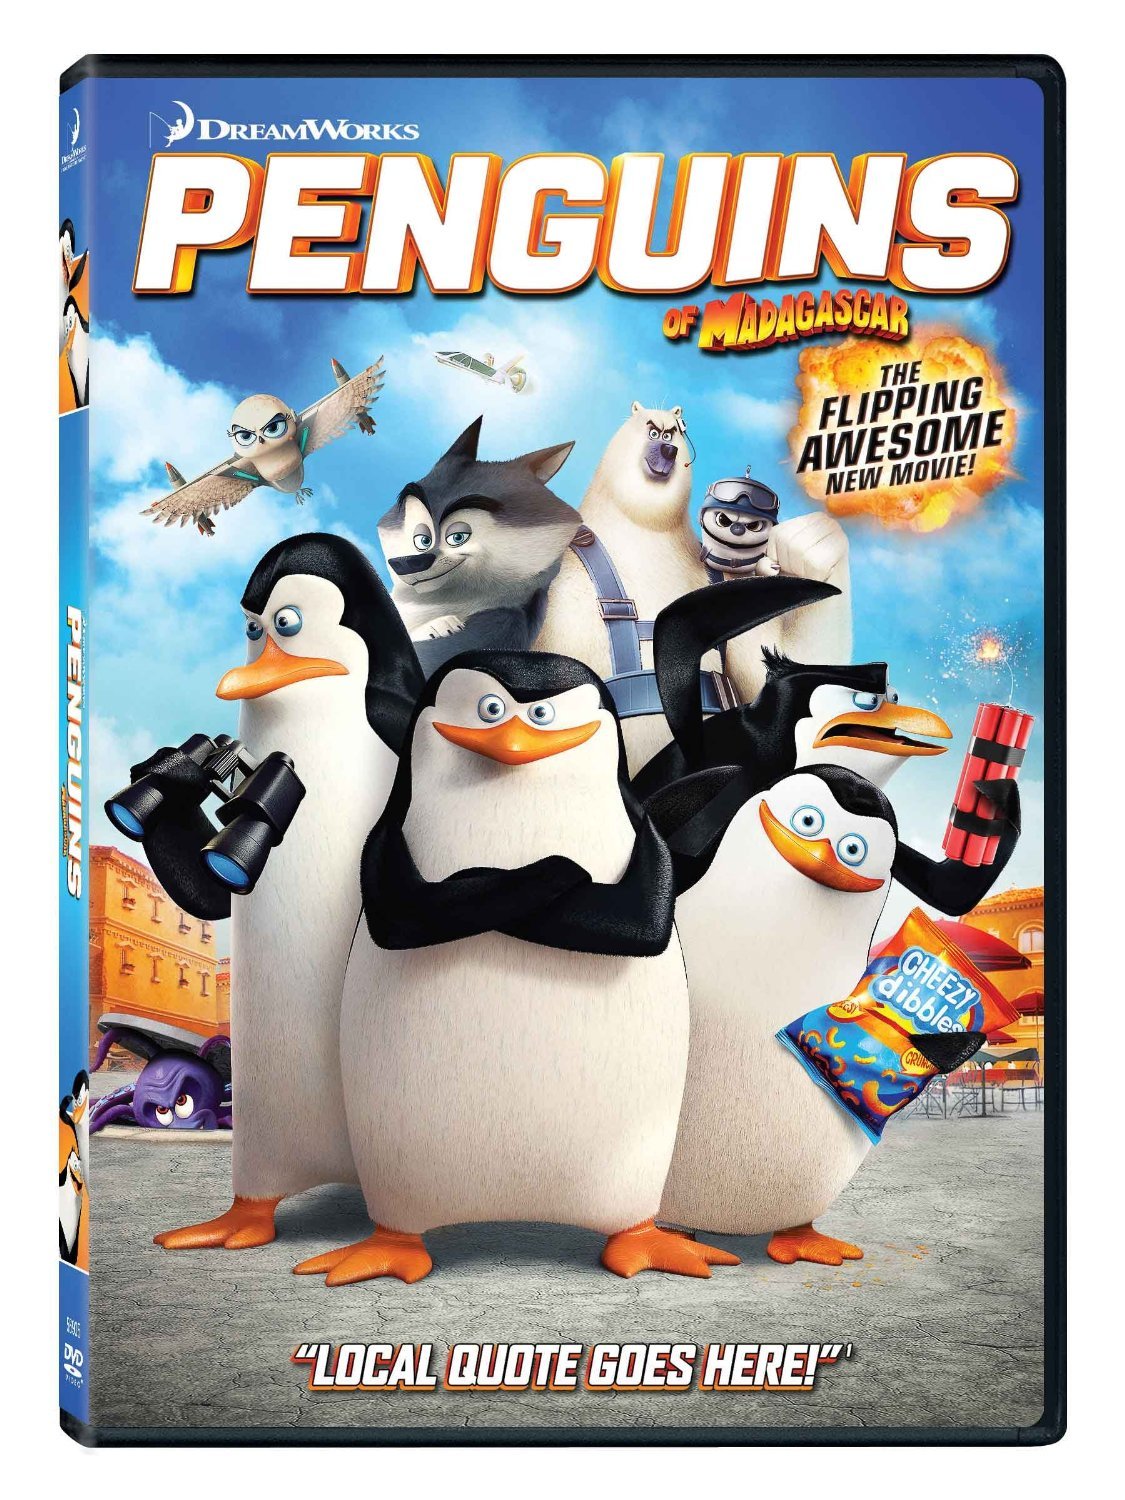 penguins-of-madagascar-movie-purchase-or-watch-online